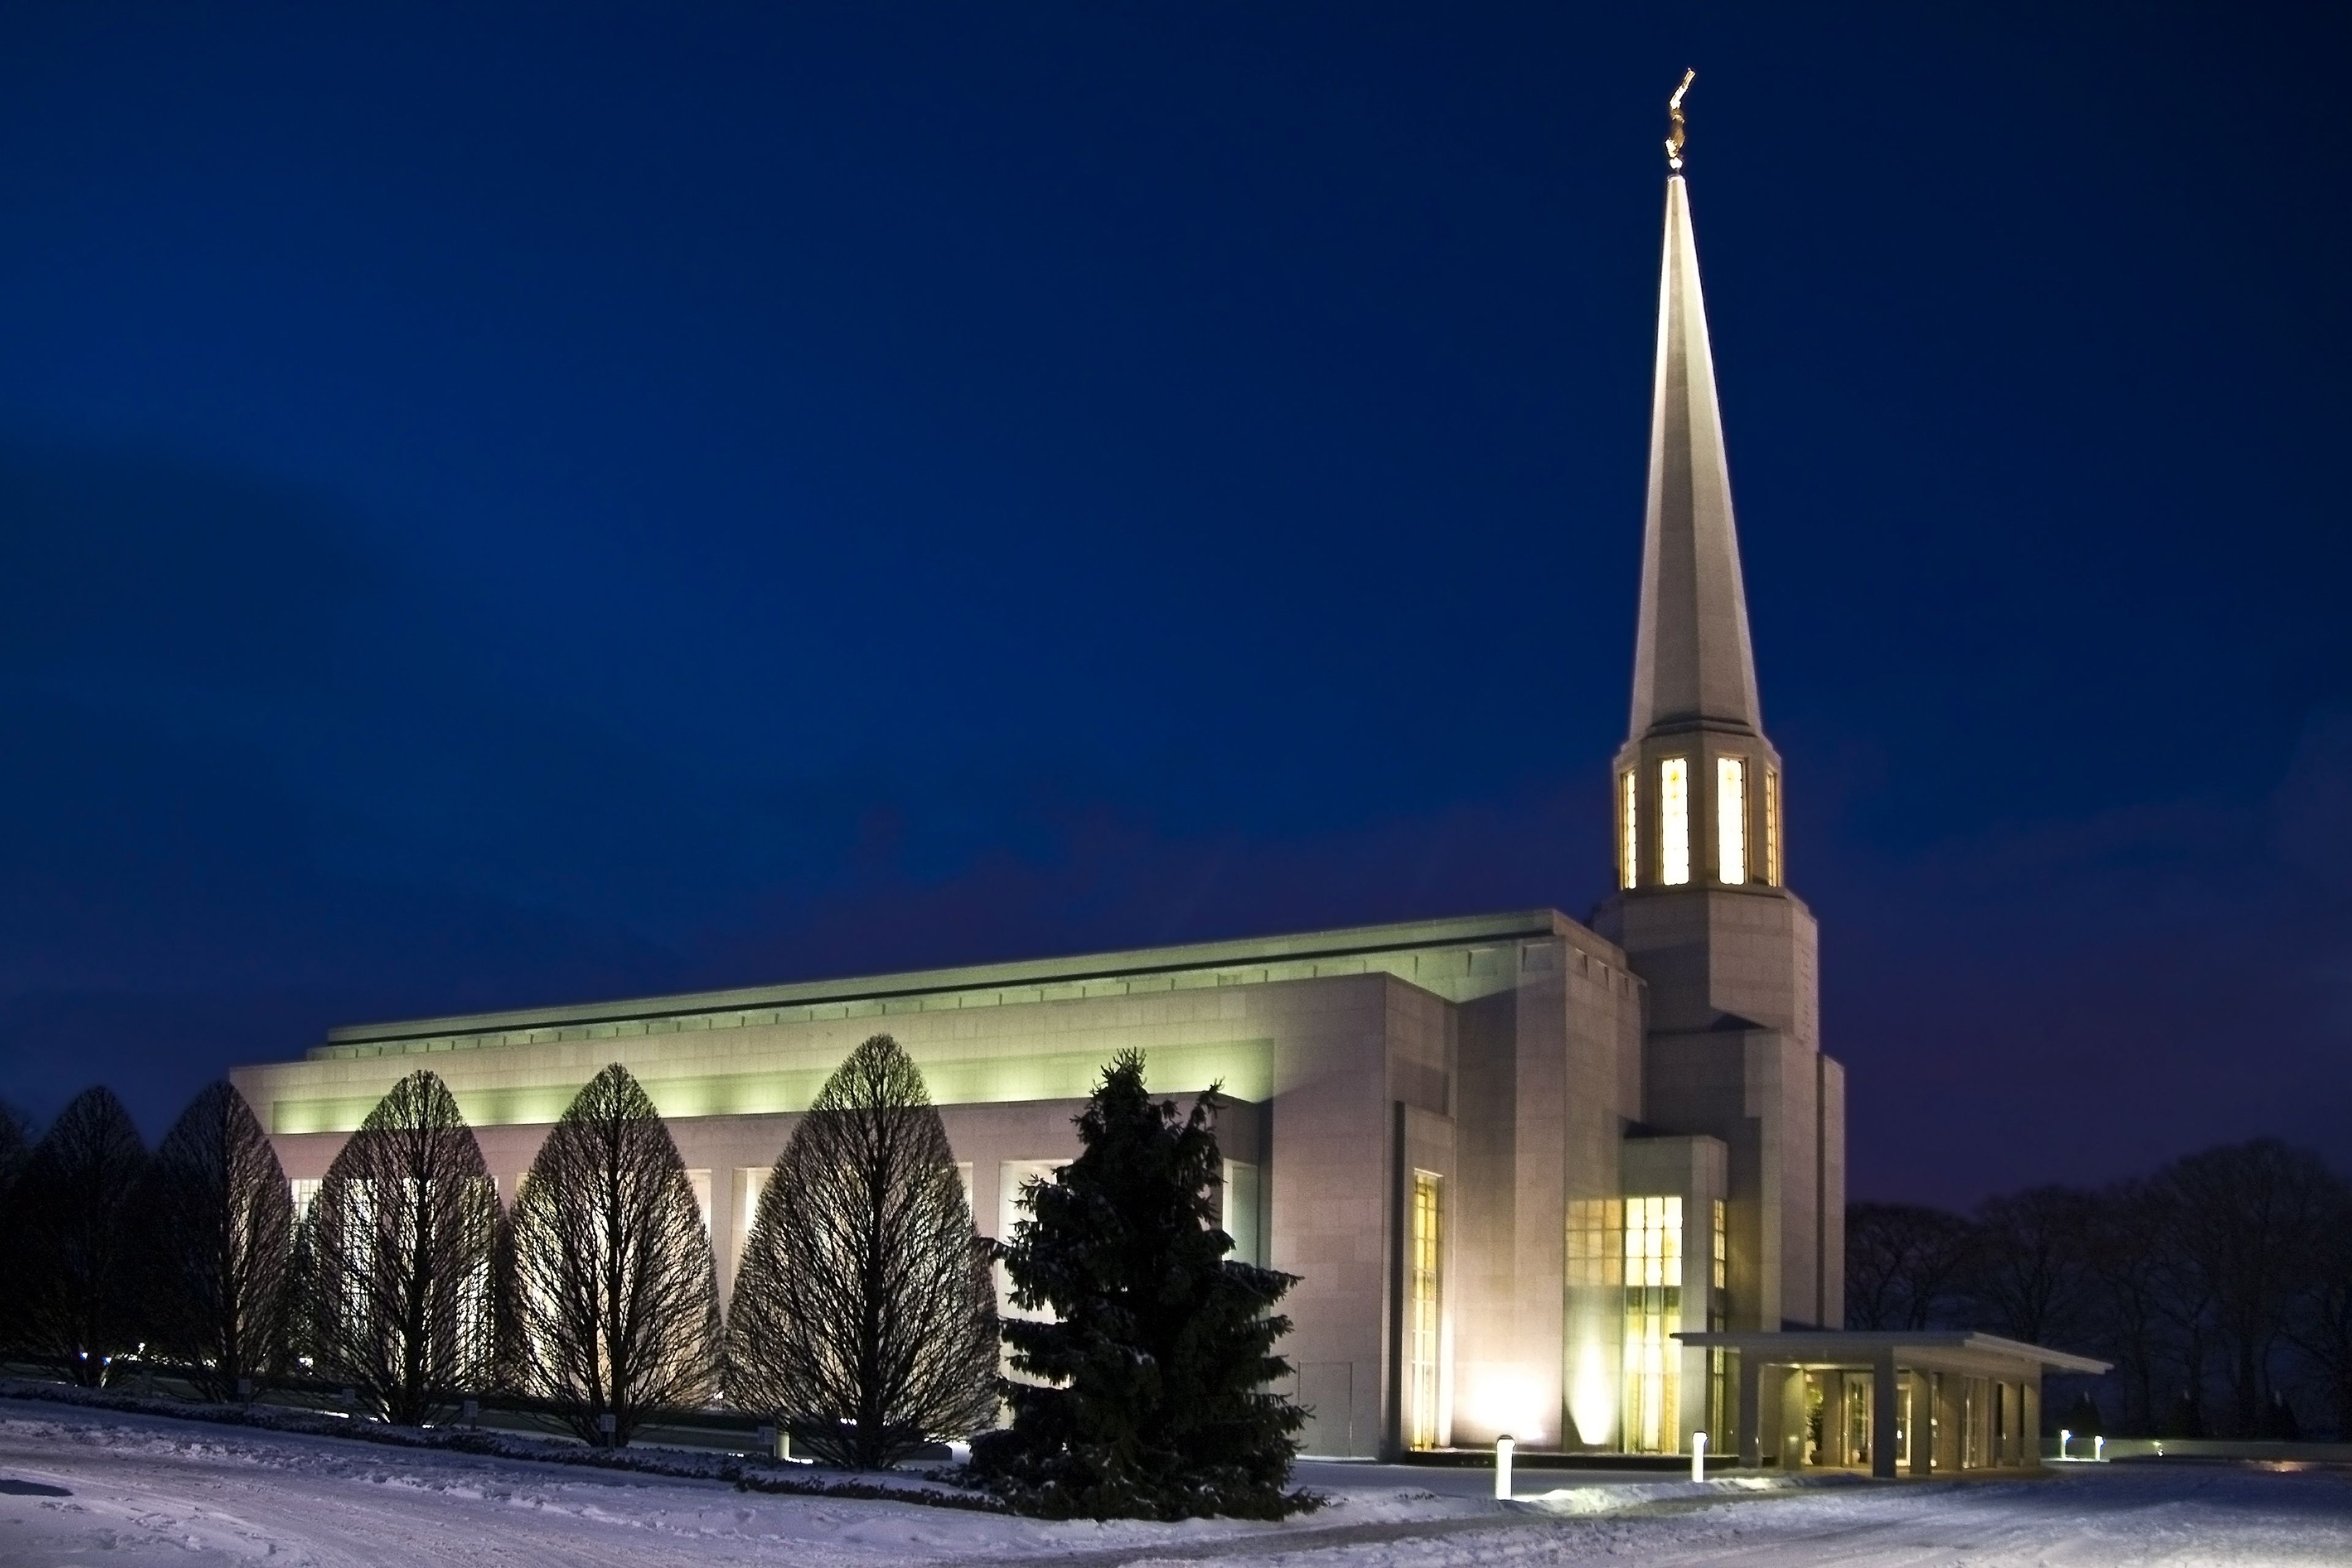 The Preston England Temple in the evening in the winter, including scenery and the entrance.